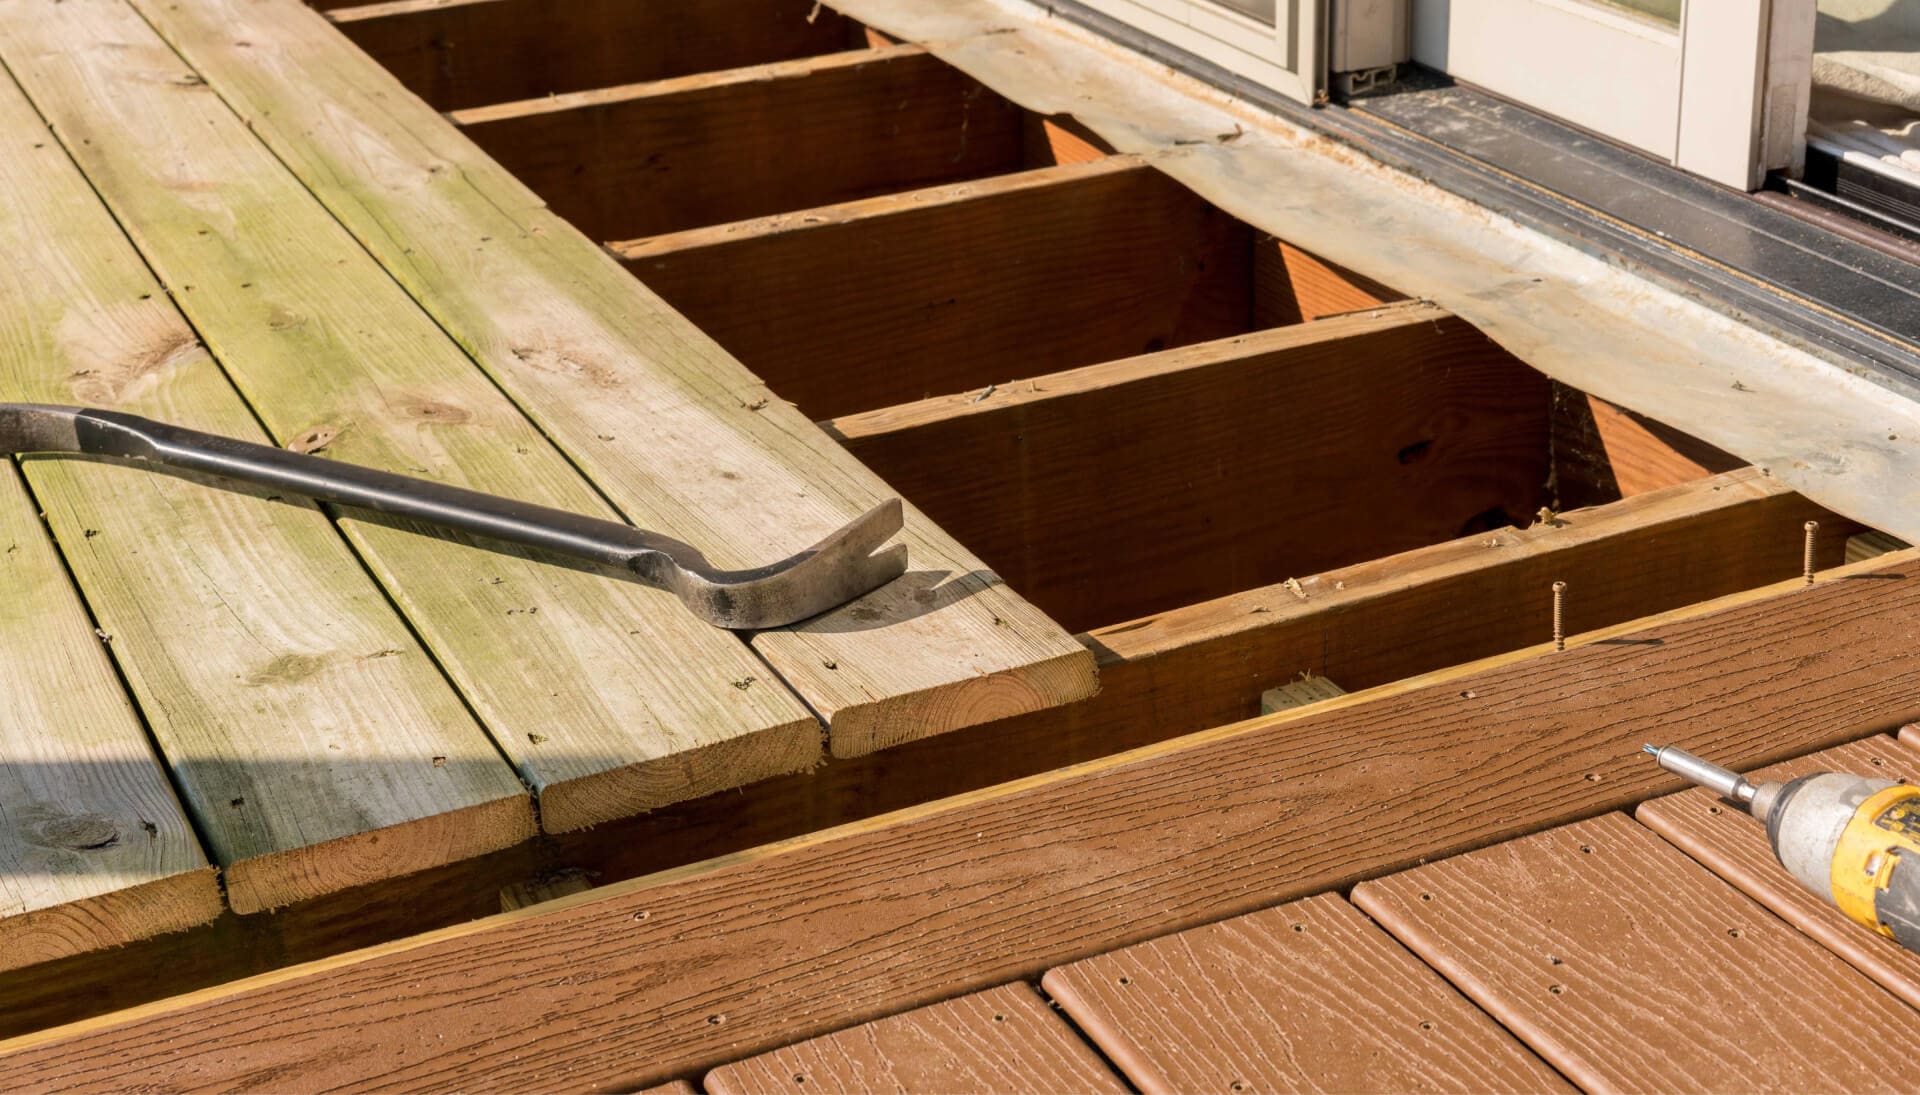 A professional deck repair service in Augusta, providing thorough inspections and maintenance to ensure the safety and durability of the structure